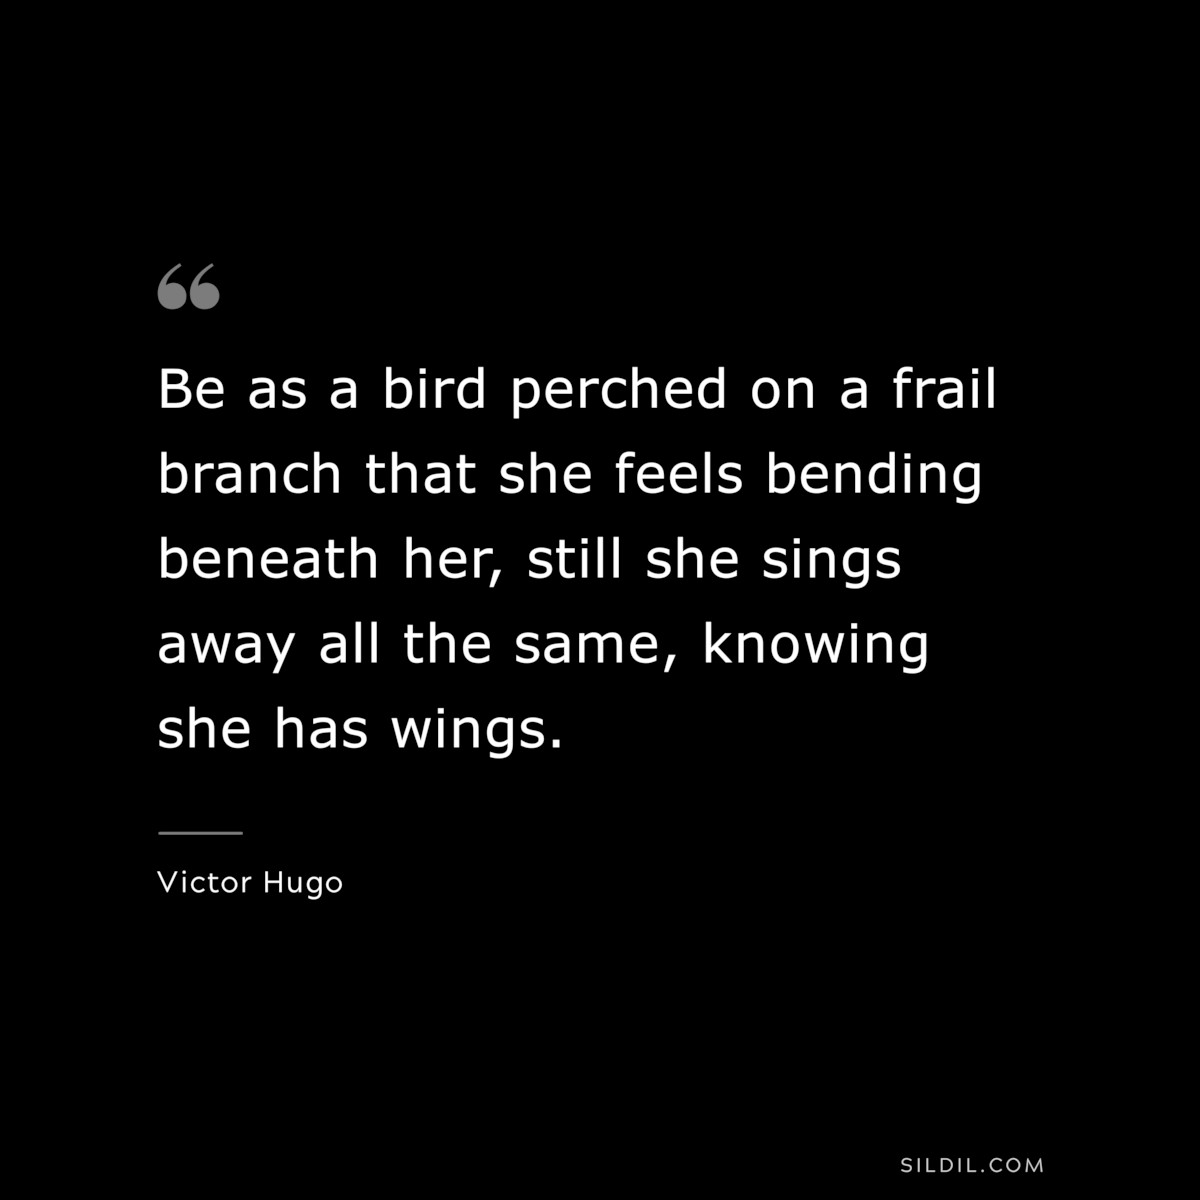 Be as a bird perched on a frail branch that she feels bending beneath her, still she sings away all the same, knowing she has wings.― Victor Hugo